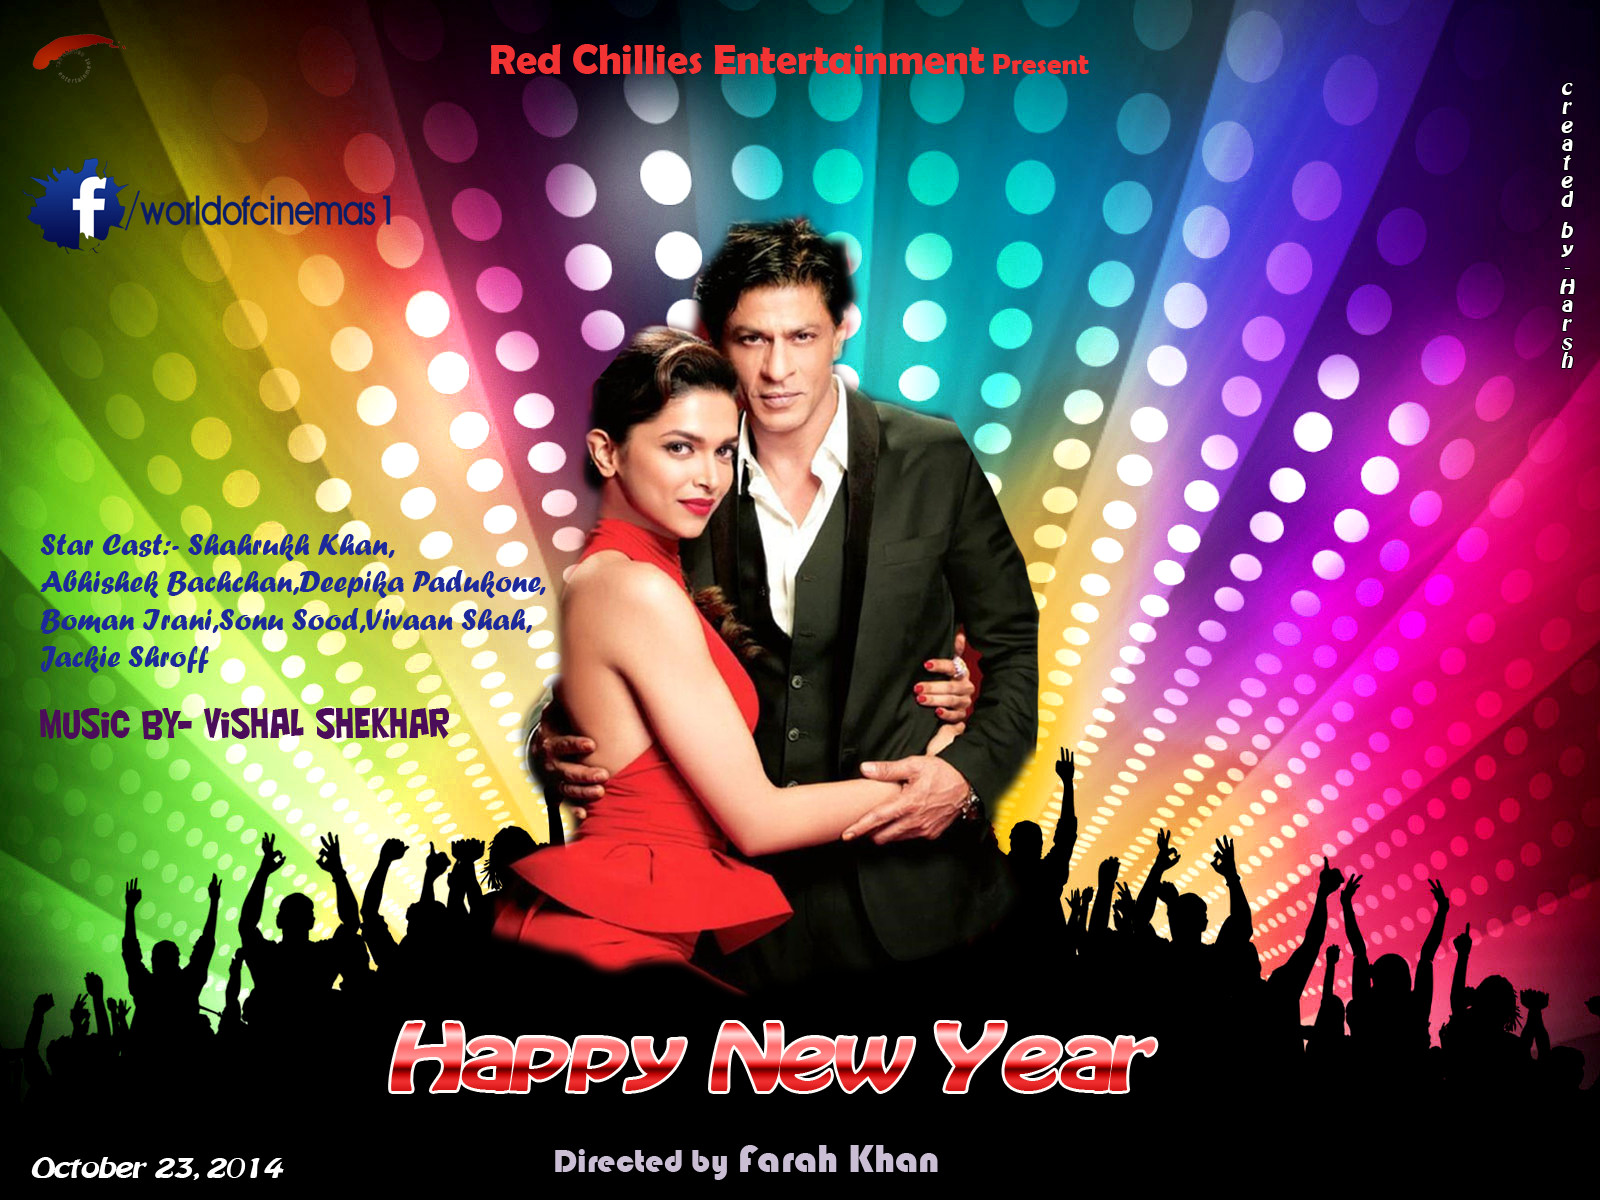 You May Show Original Image And Post About Happy New Year Movie In